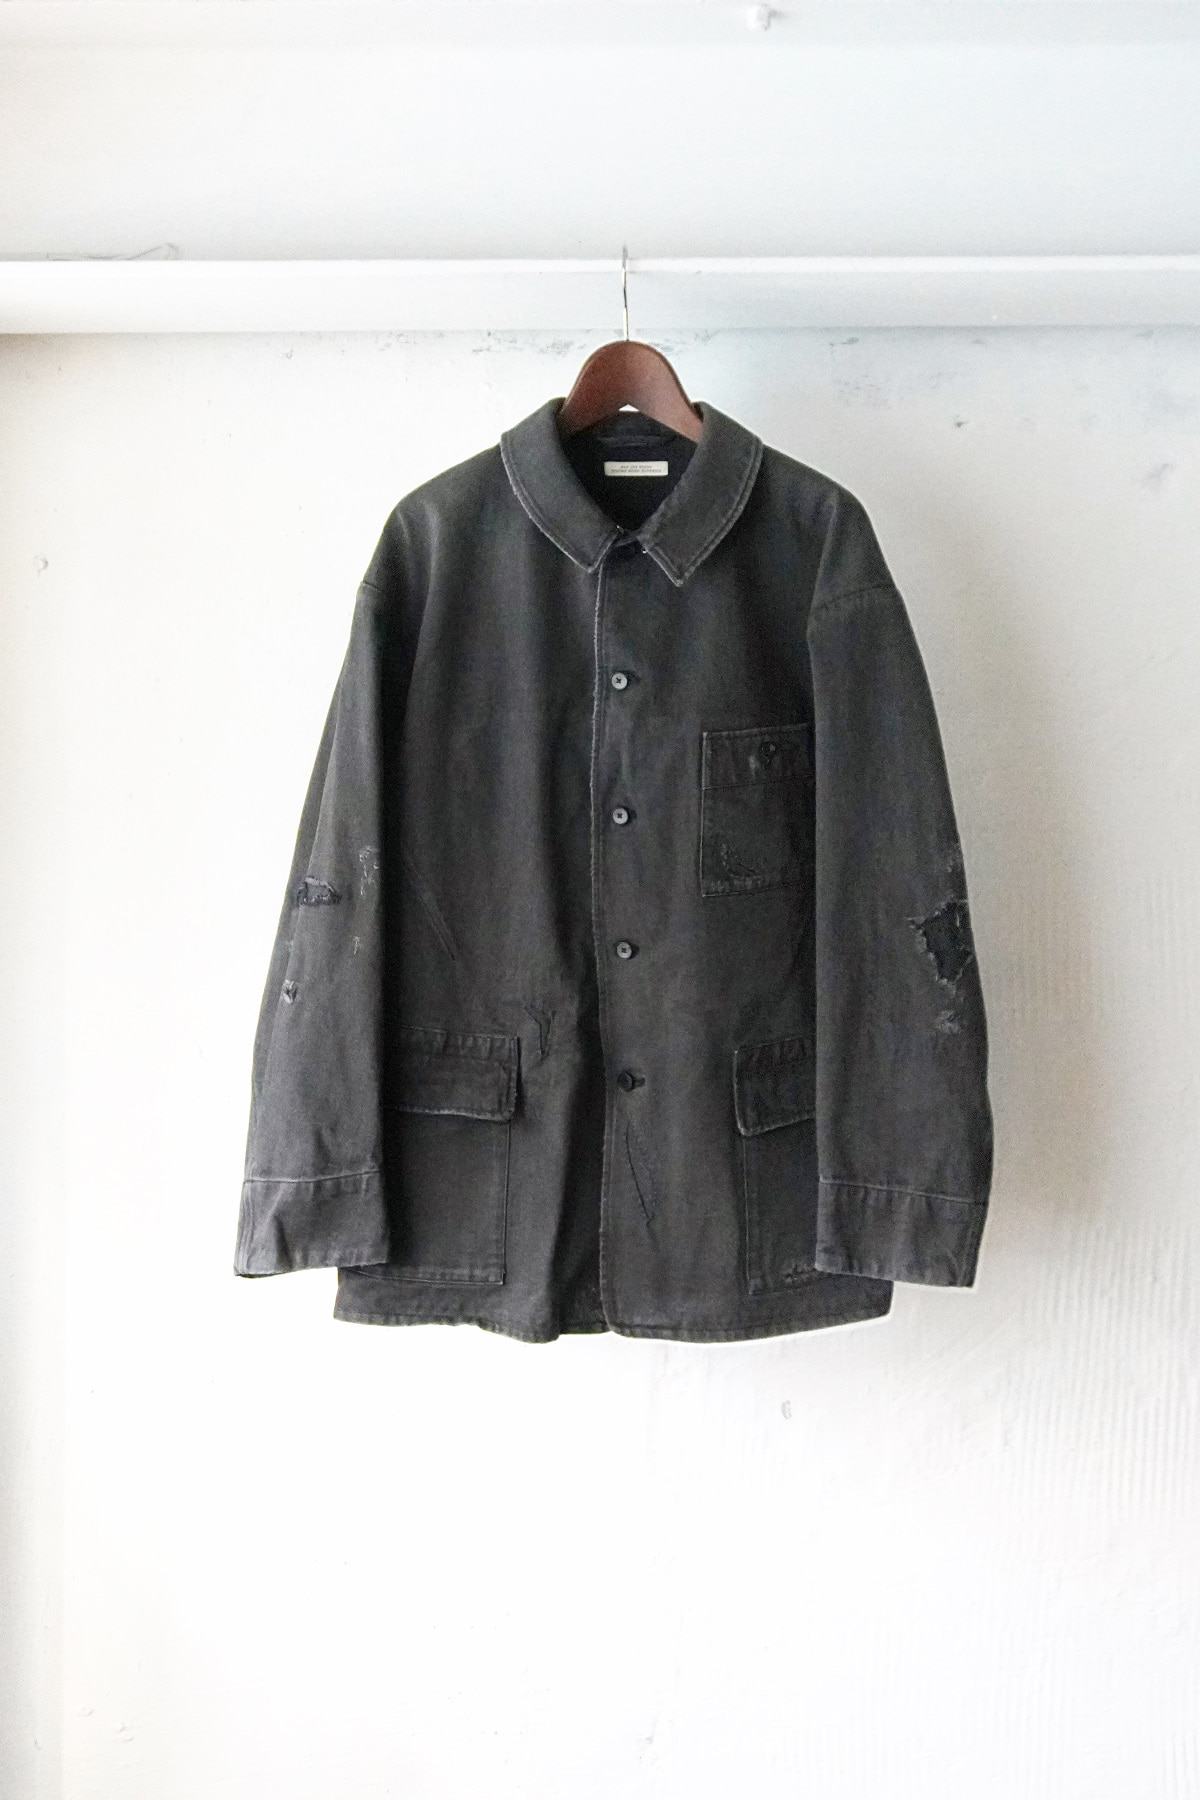 [OLD JOE BRAND] Backpack Rover Jacket (Scarface) - Graphite